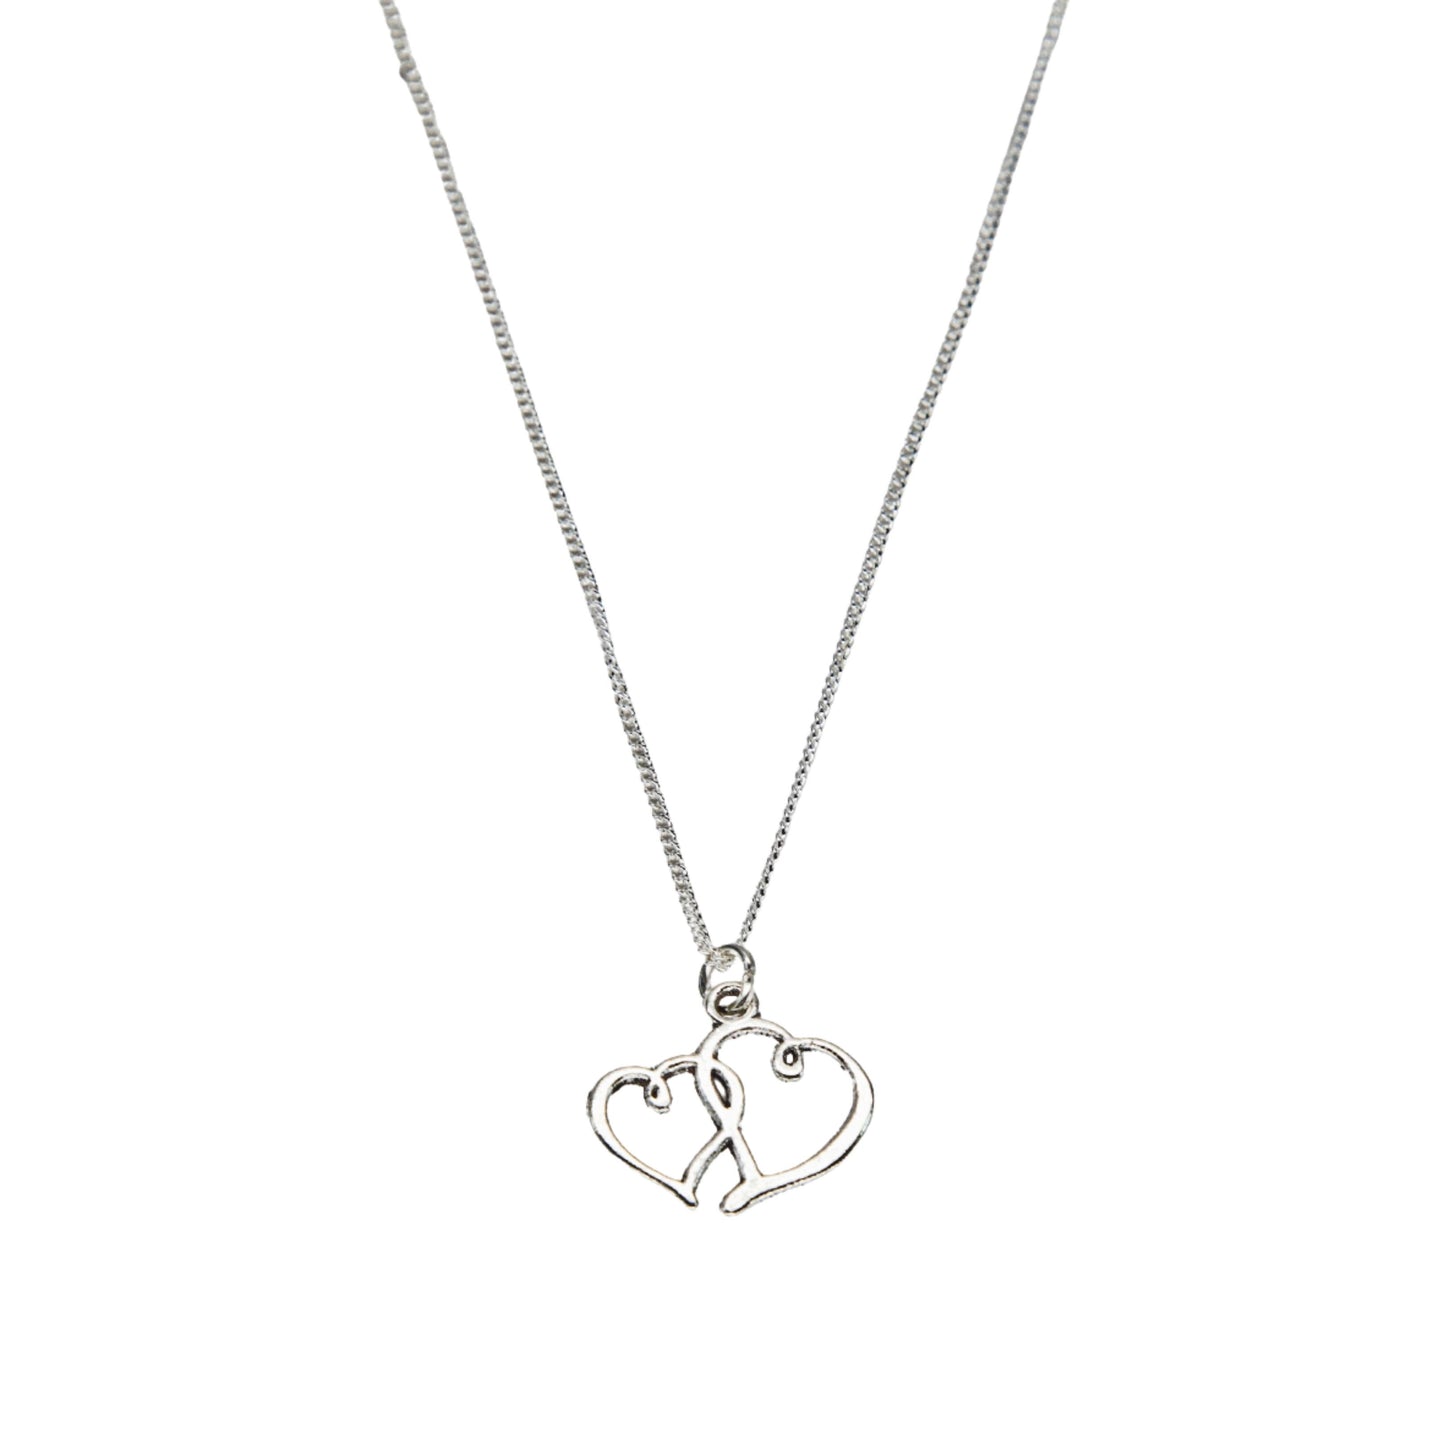 Silver Double Heart Necklace - Adjustable Length